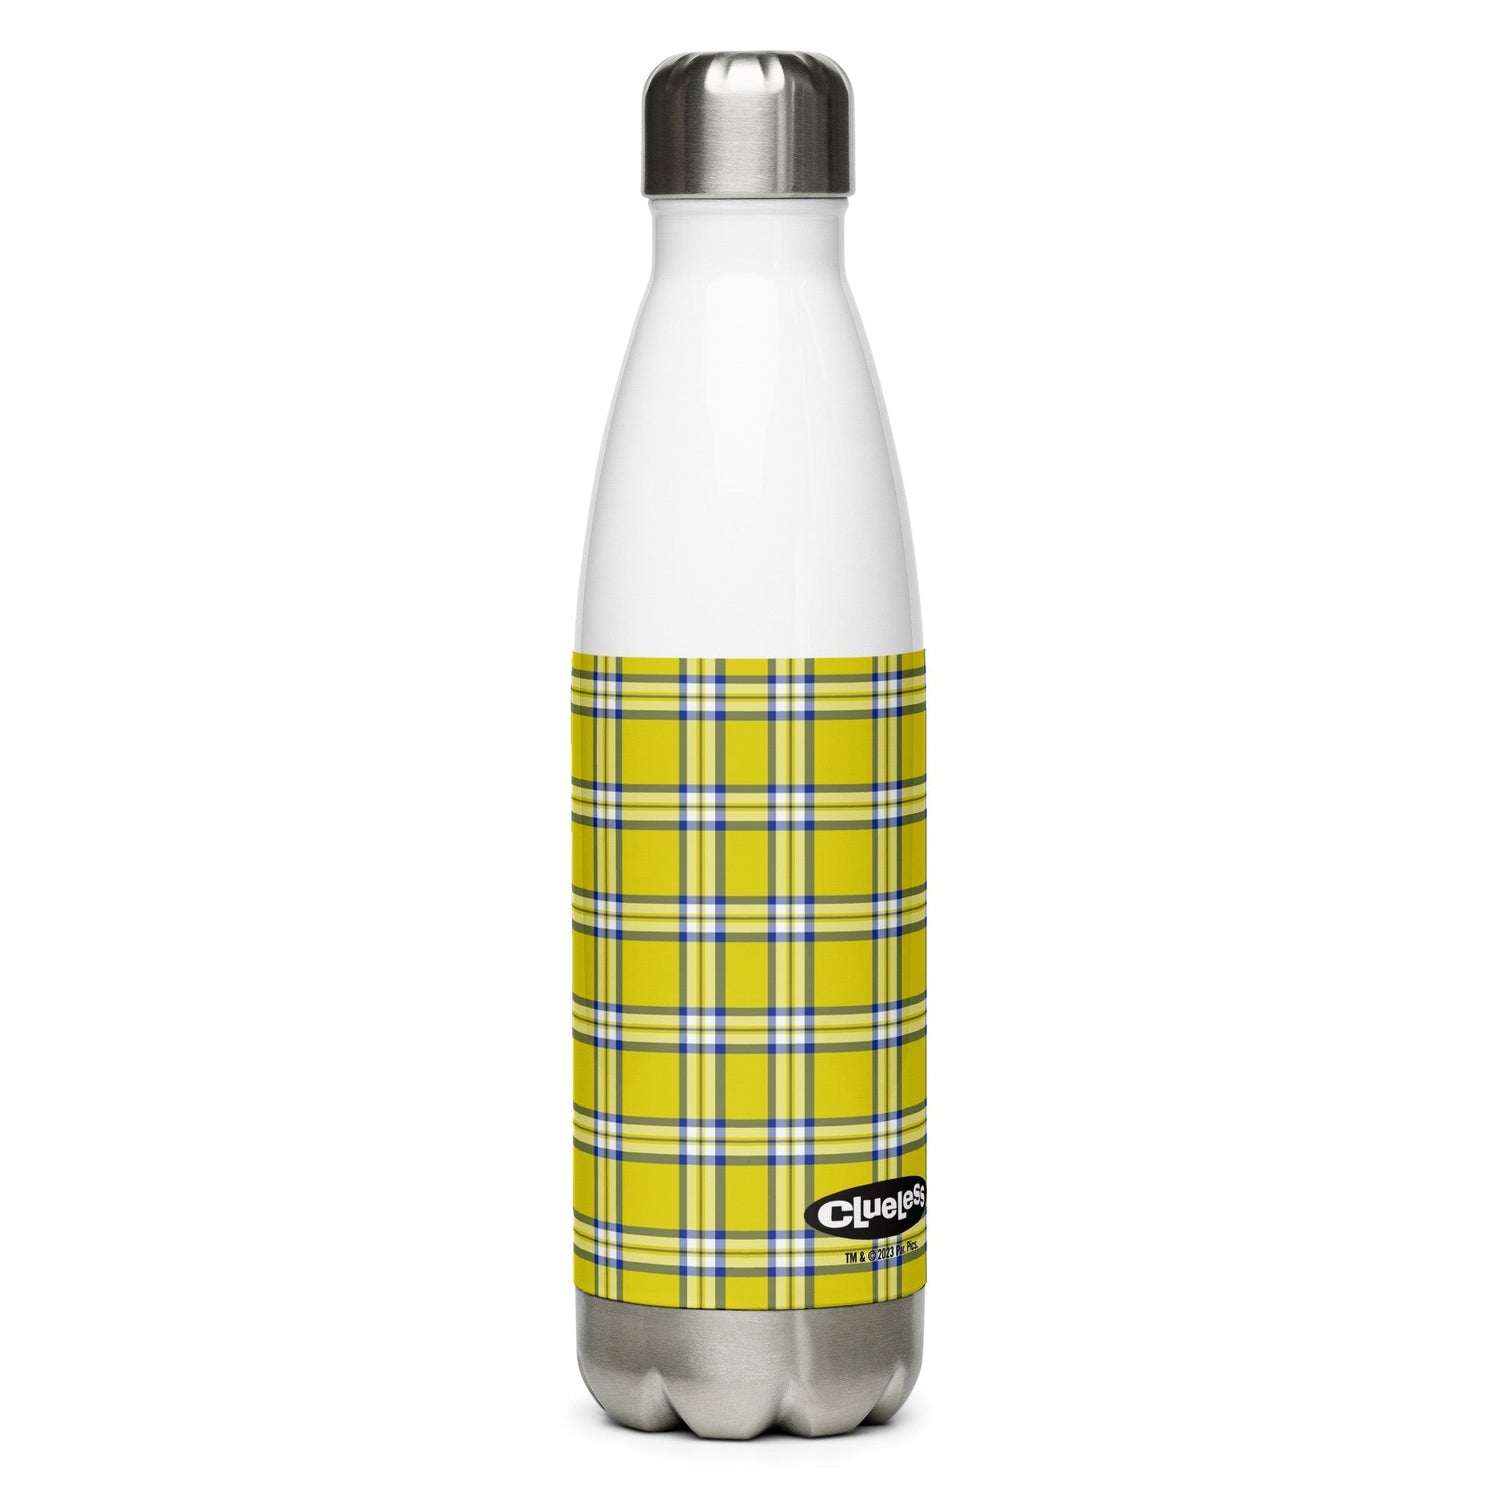 Clueless Yellow Plaid Stainless Steel Water Bottle - Paramount Shop